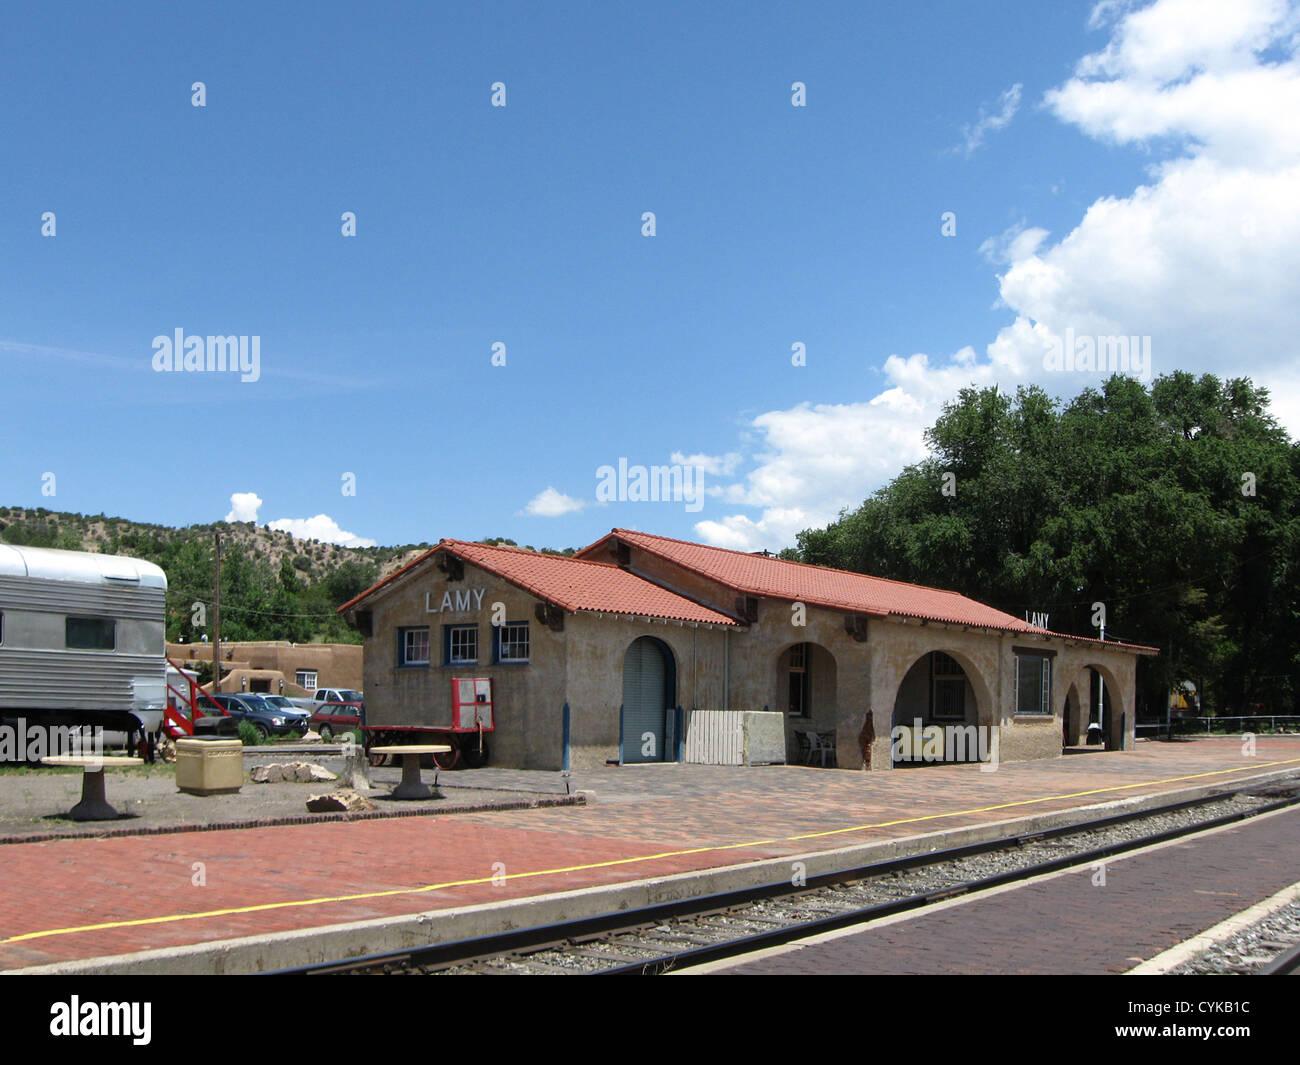 Train station in Lamy, New Mexico Stock Photo